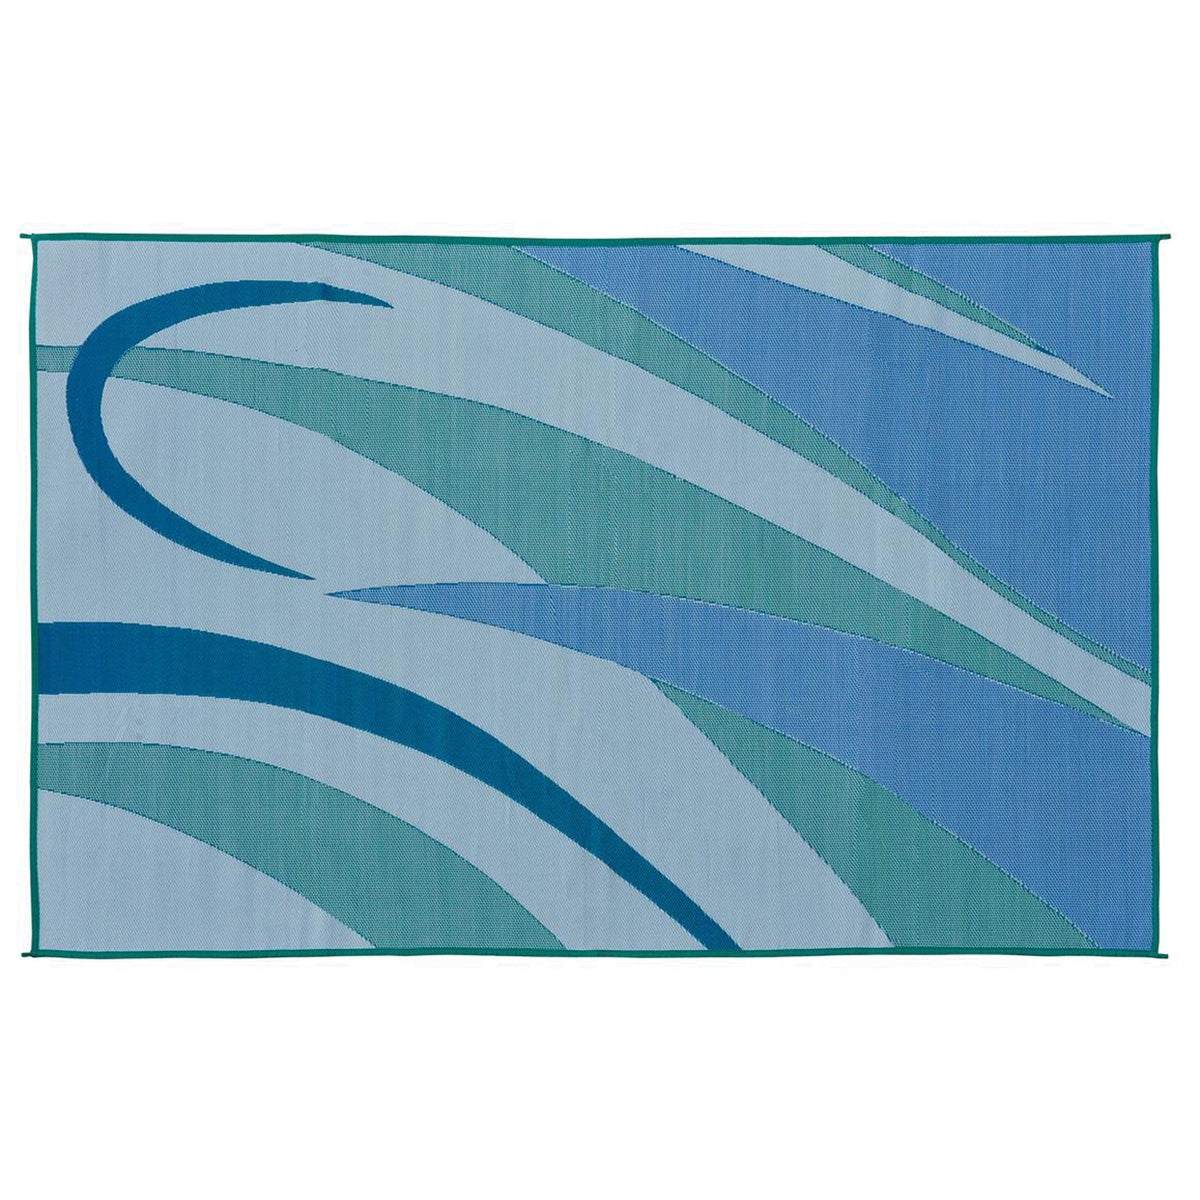 Ming's Mark Qualifies for Free Shipping Ming's Mark CampingGraphic Patio Mat 8' x 16' Blue/Green #GB3